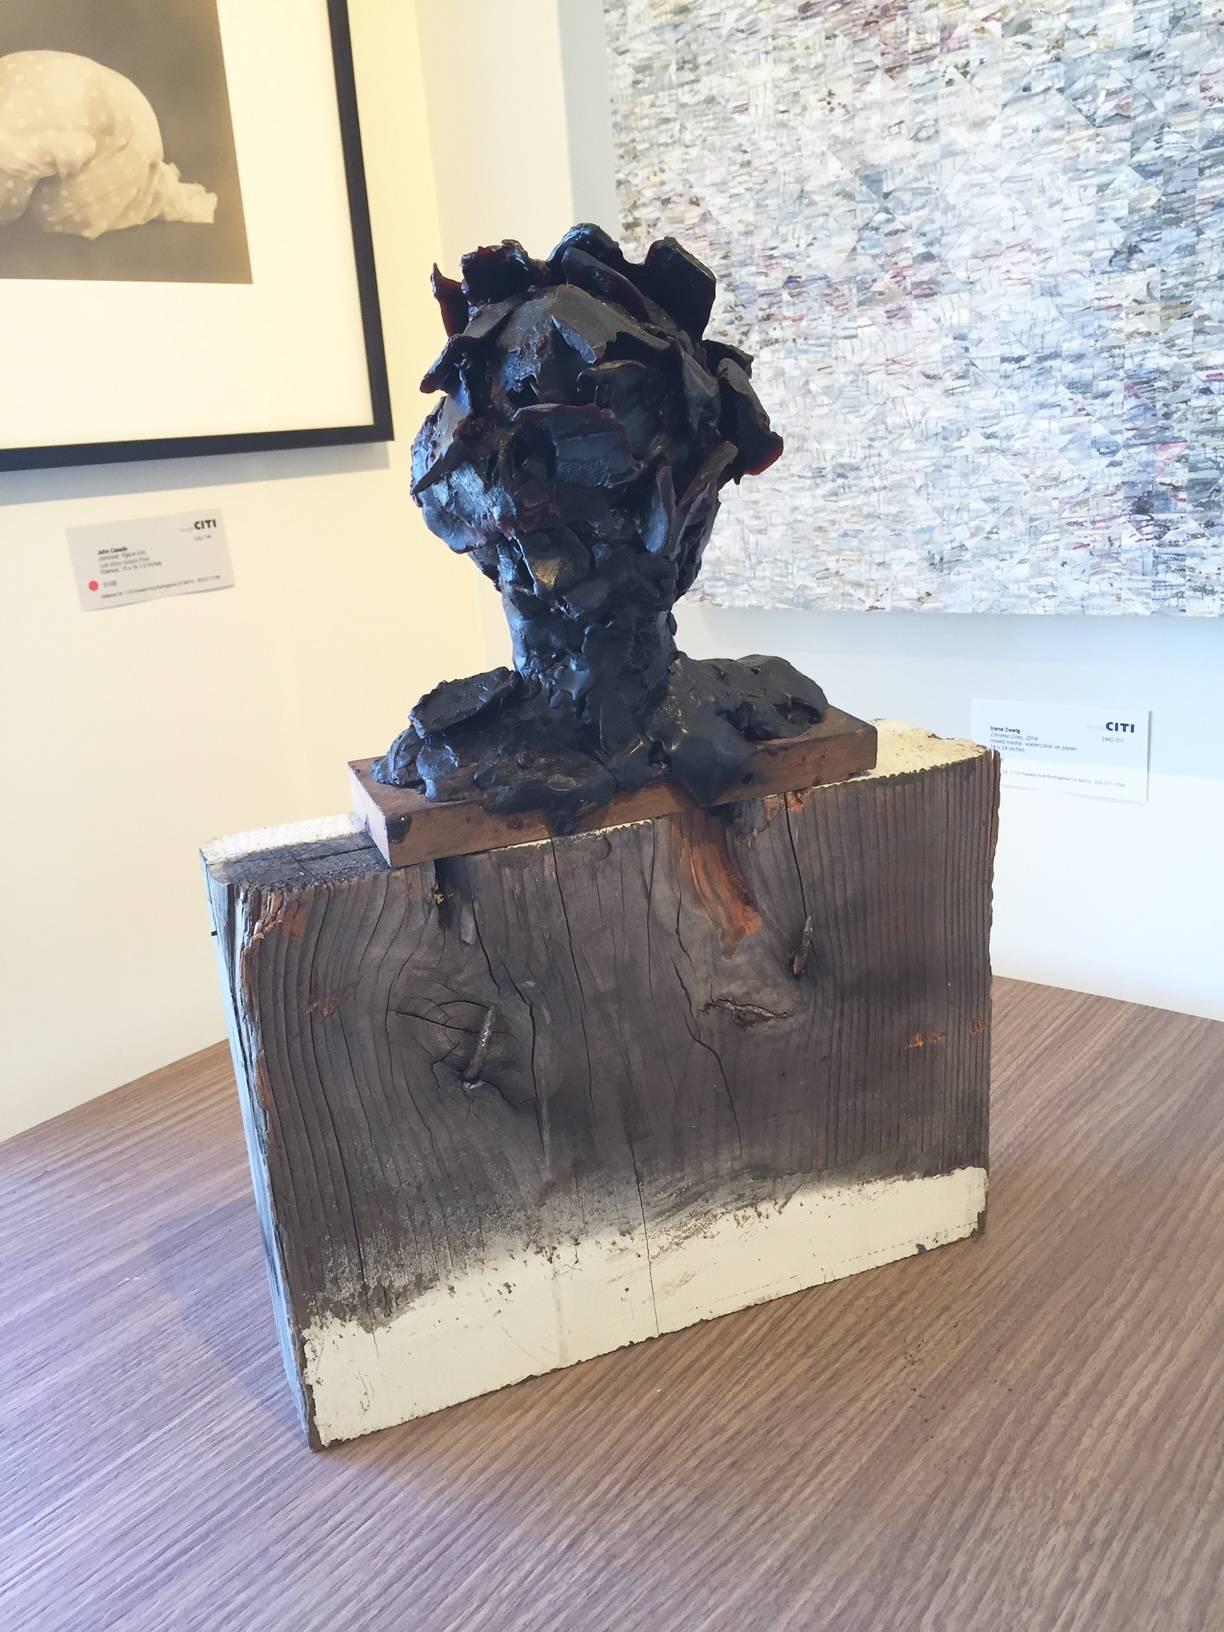 Contemporary bust from John Goodman, whose magnetic sculptures, drawings and paintings are a dichotomy of understated minimalism conveying a subtle, but evident smoldering energy. In 'Head No. 2 2010-2013' the artist uses wax and wood, to form an